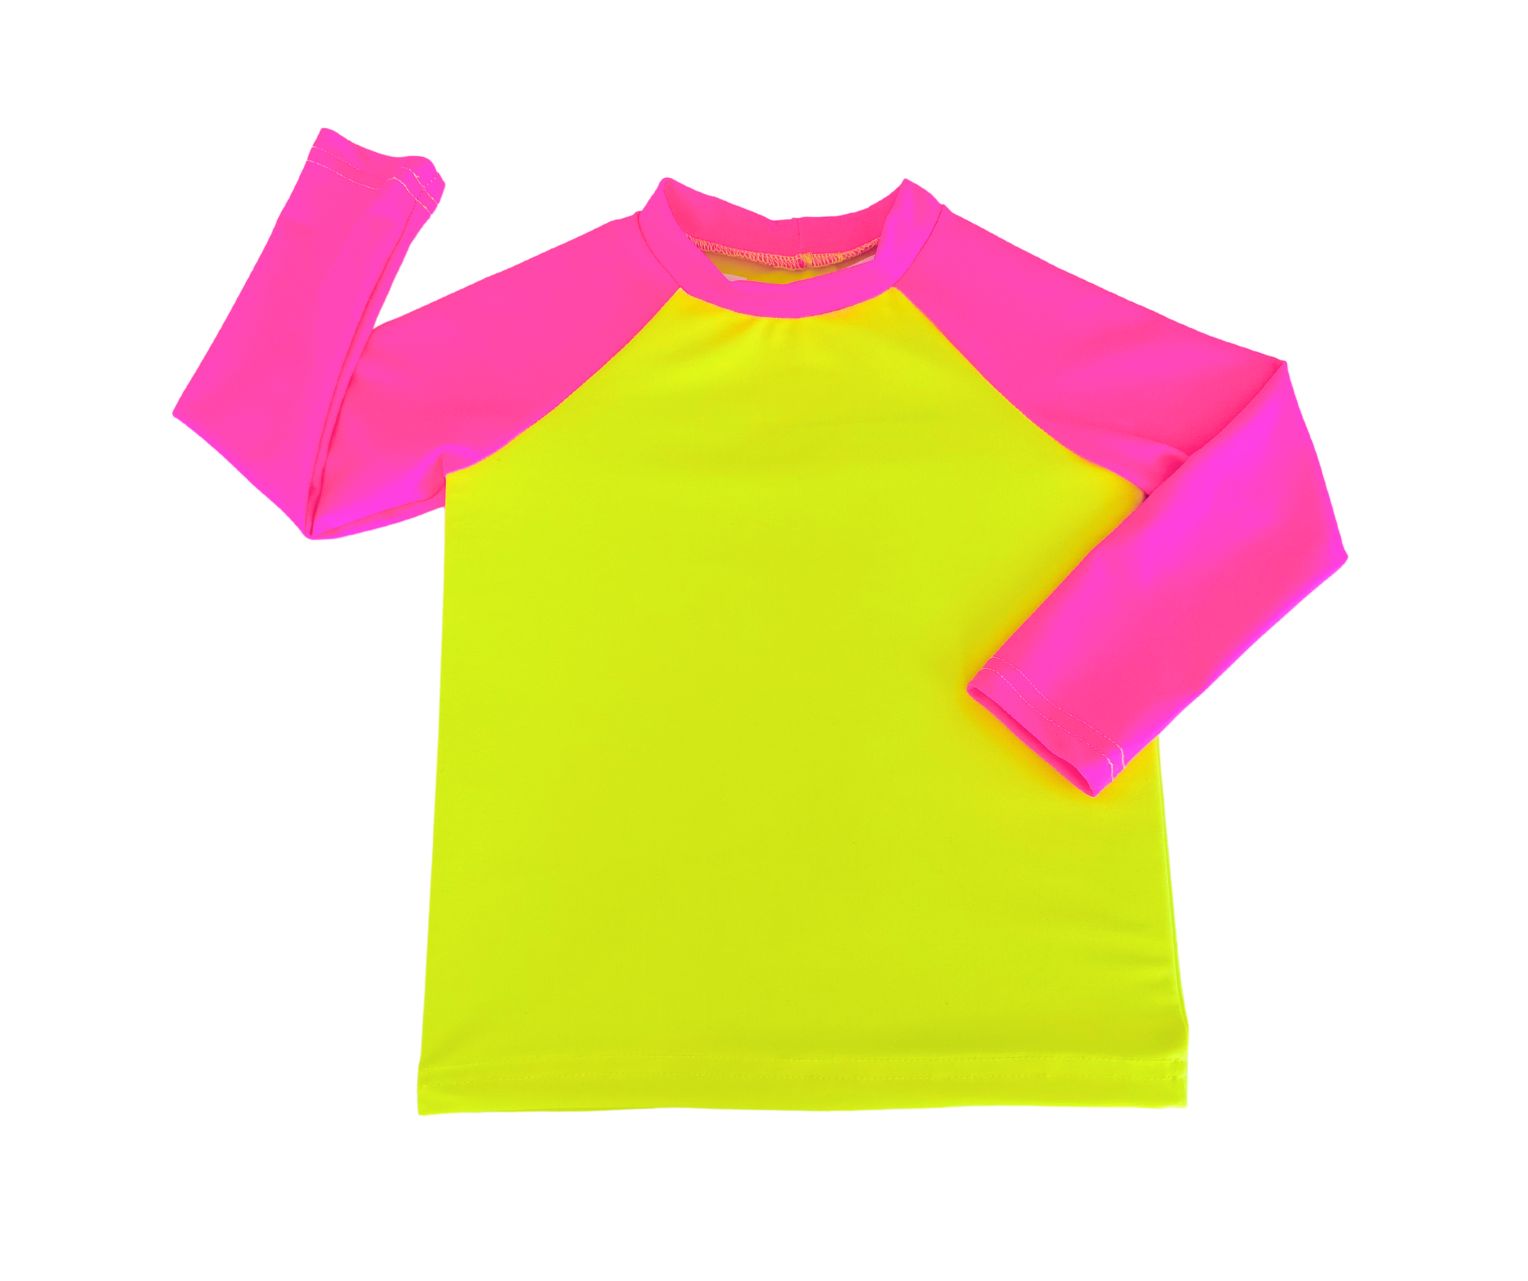 A single product image of a neon yellow rash guard with neon pink long sleeves.